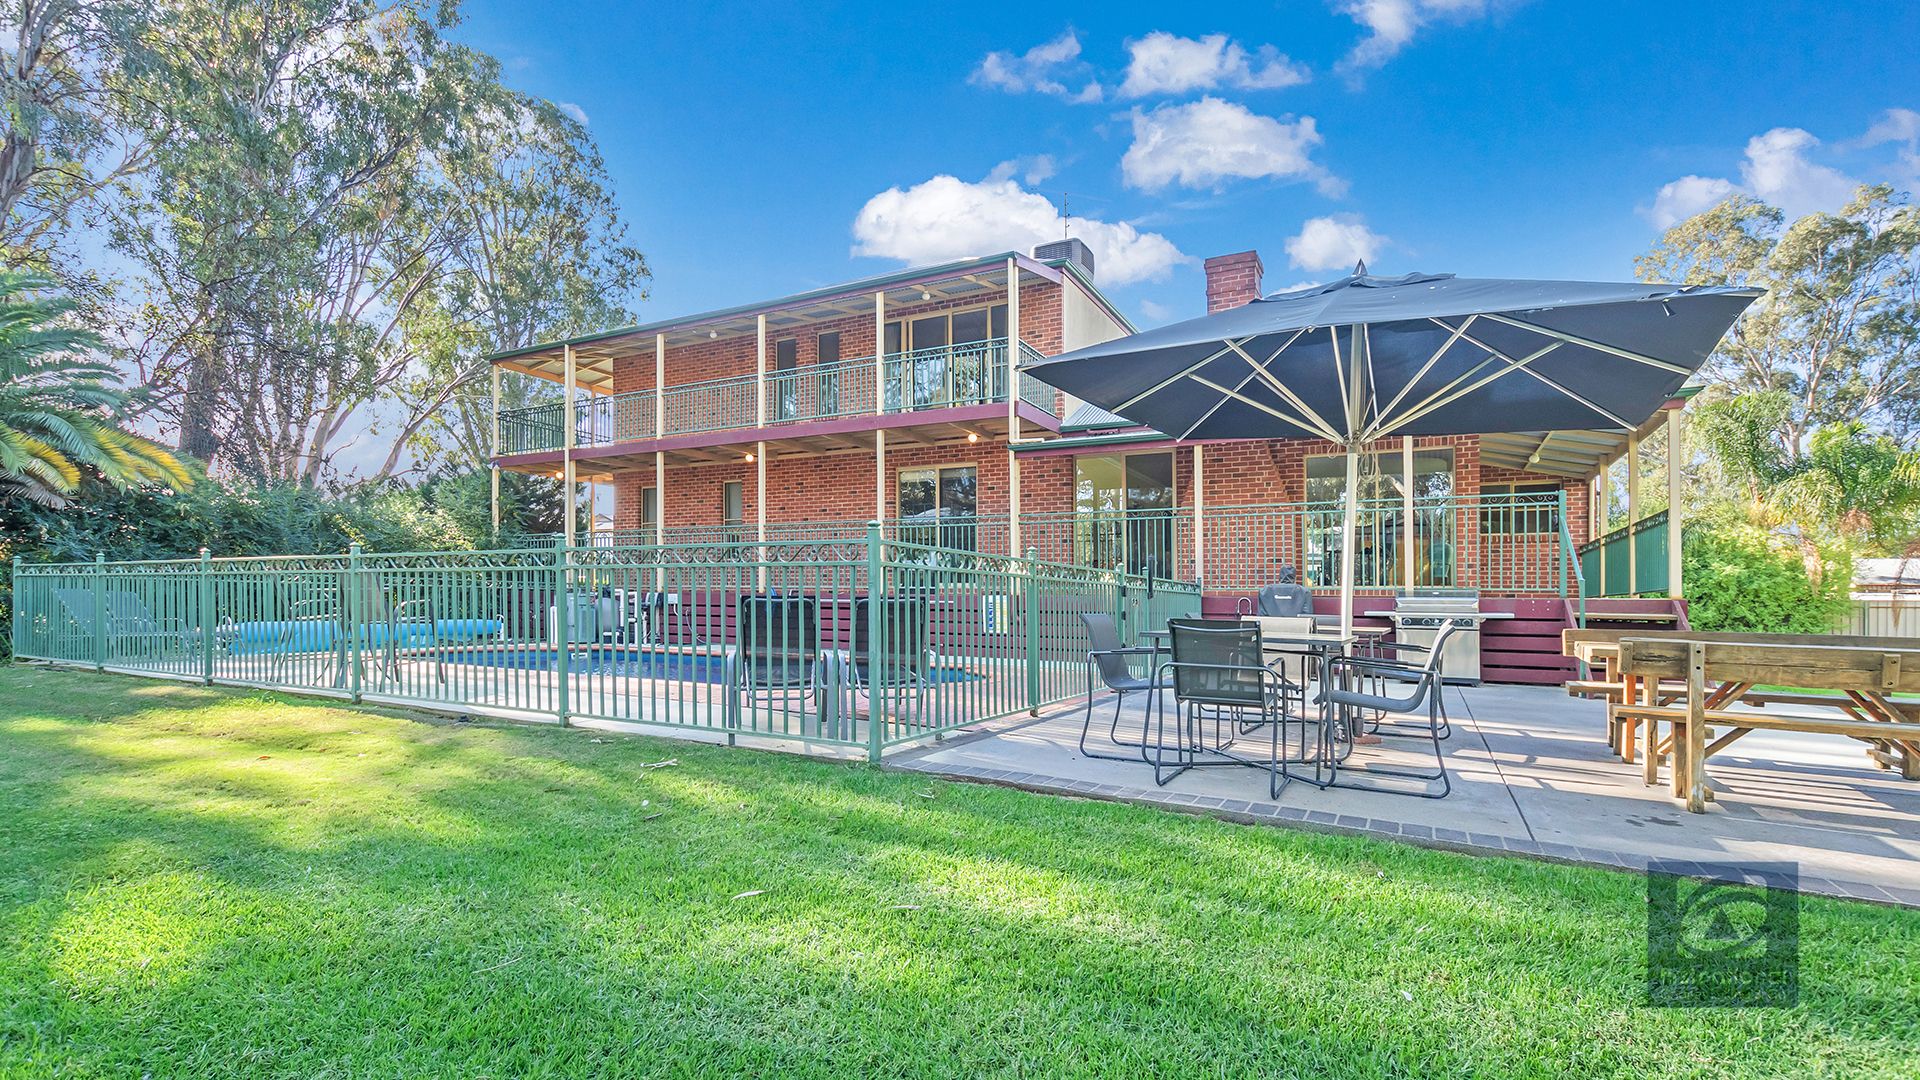 21-23 Connelly Street, Echuca VIC 3564, Image 2